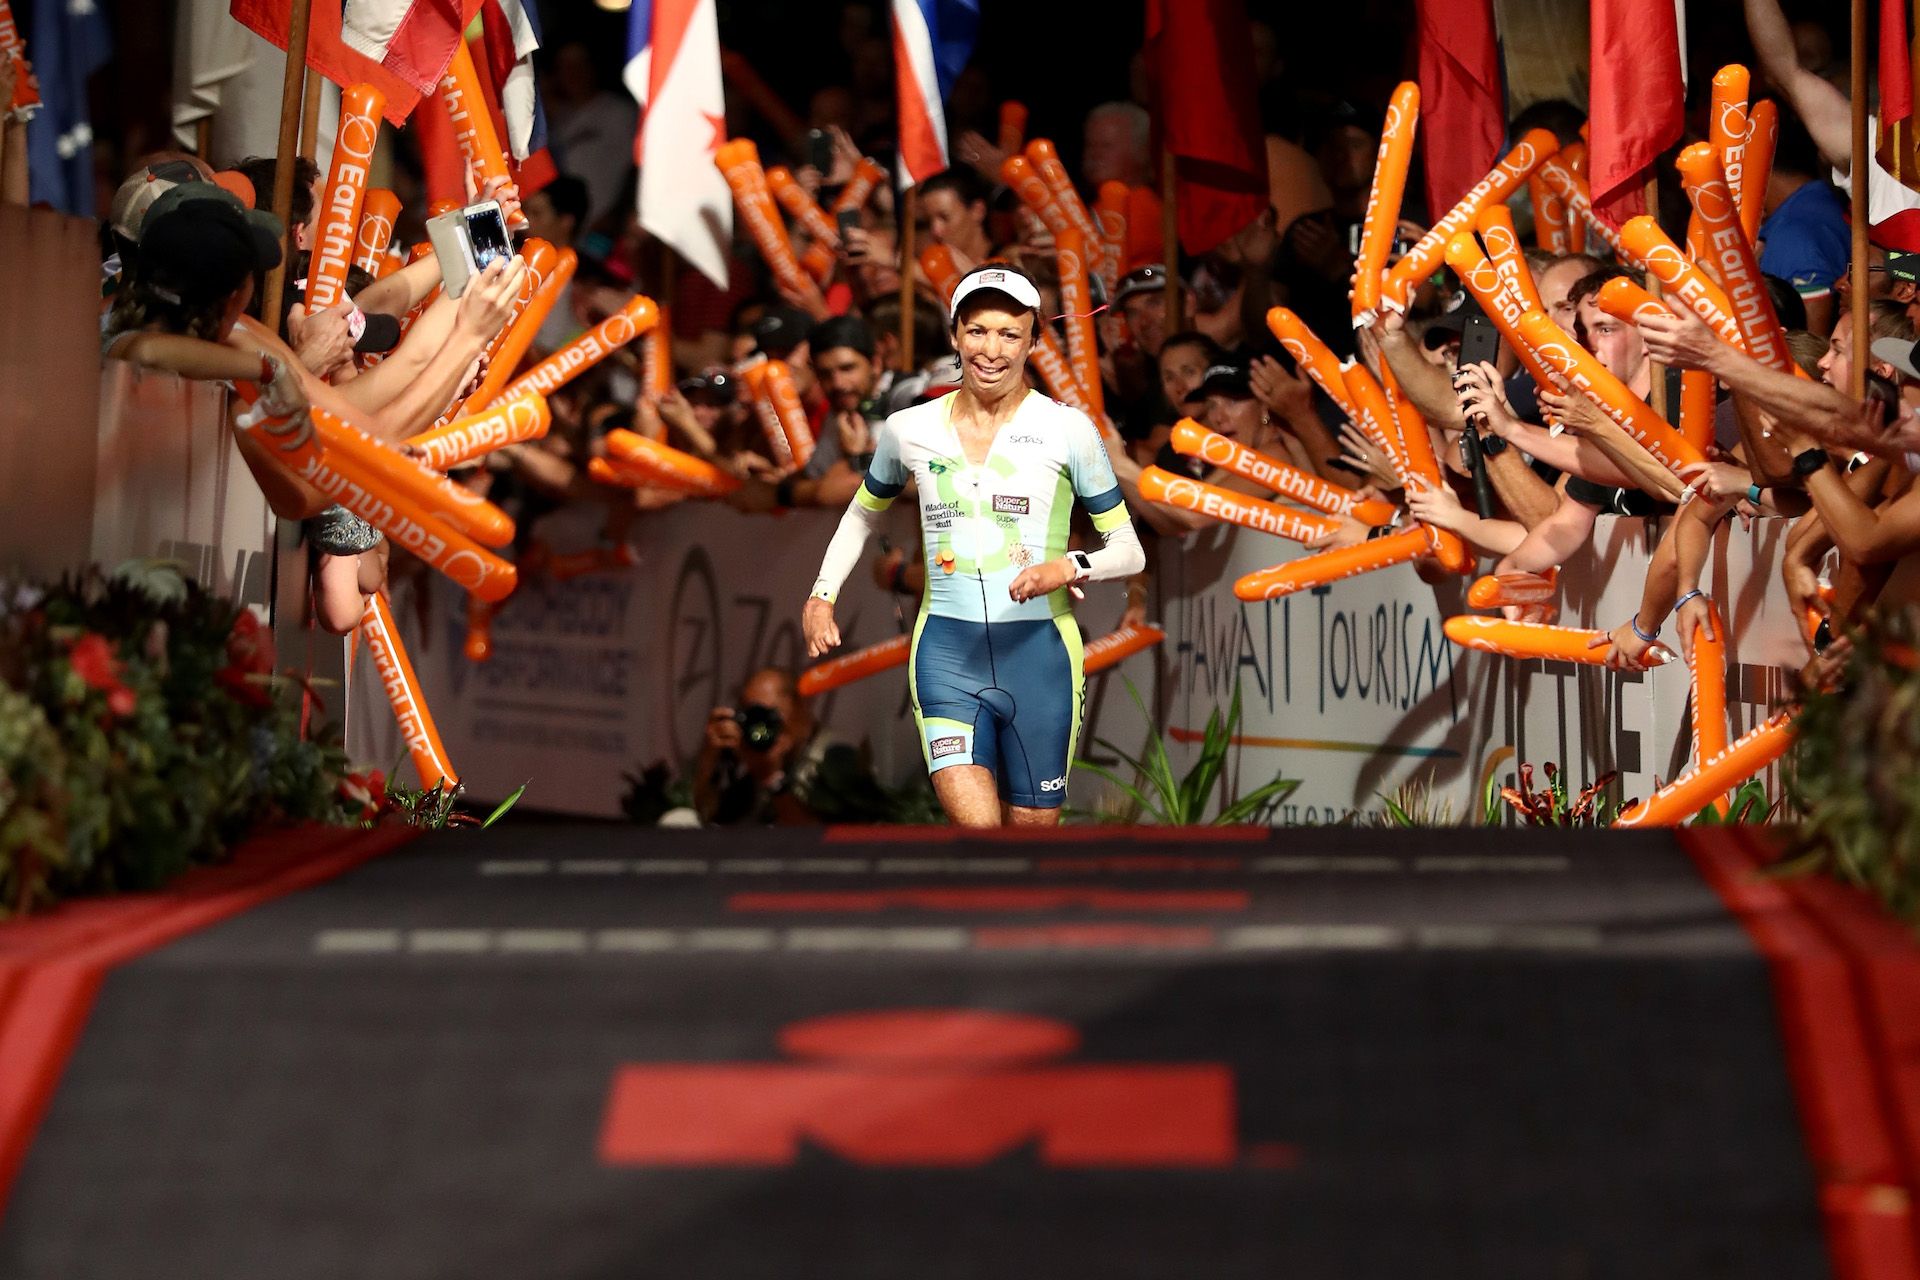 Photo by Sean M. Haffey/Getty Images for Ironman